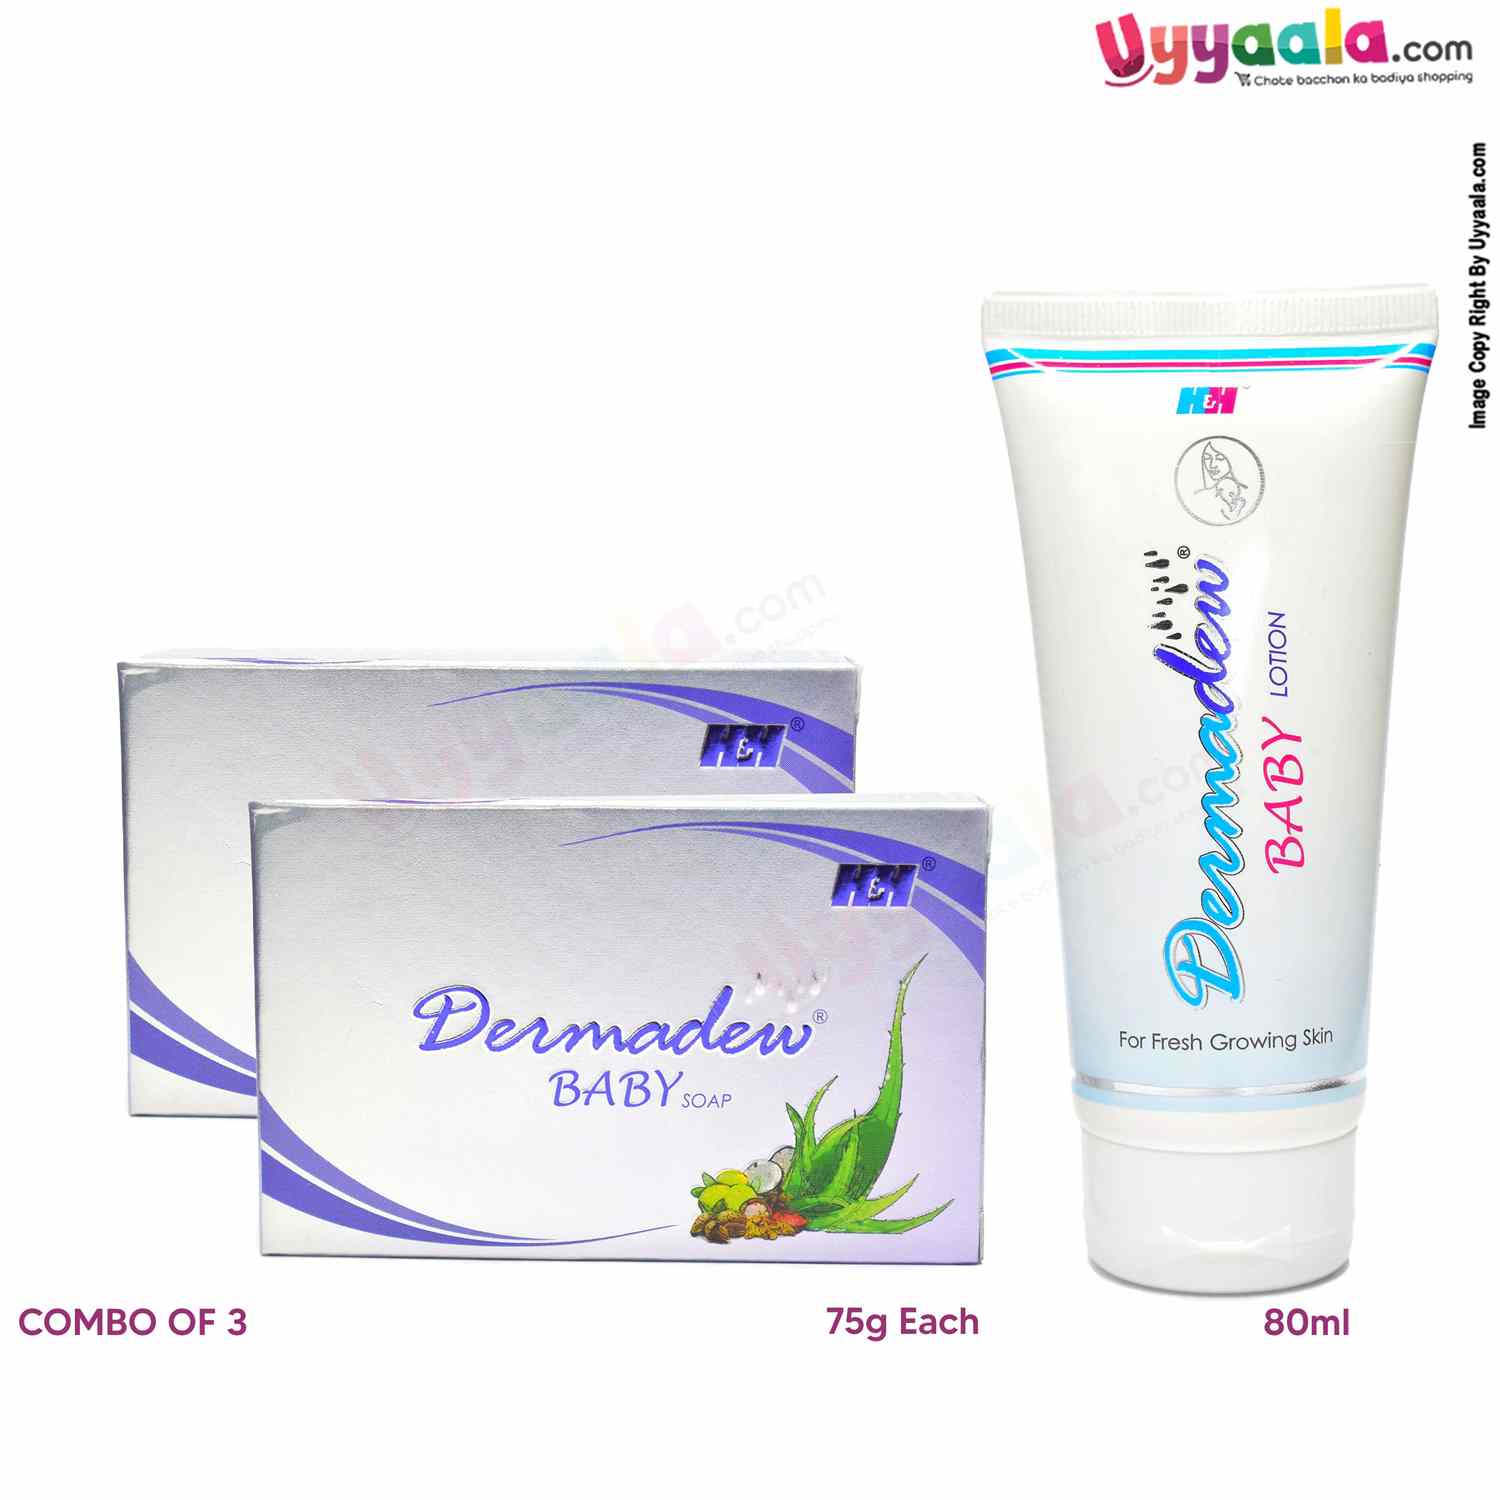 DERMADEW Soap 75g Pack of 2 & Baby Lotion 80ml ( Combo of 3 )